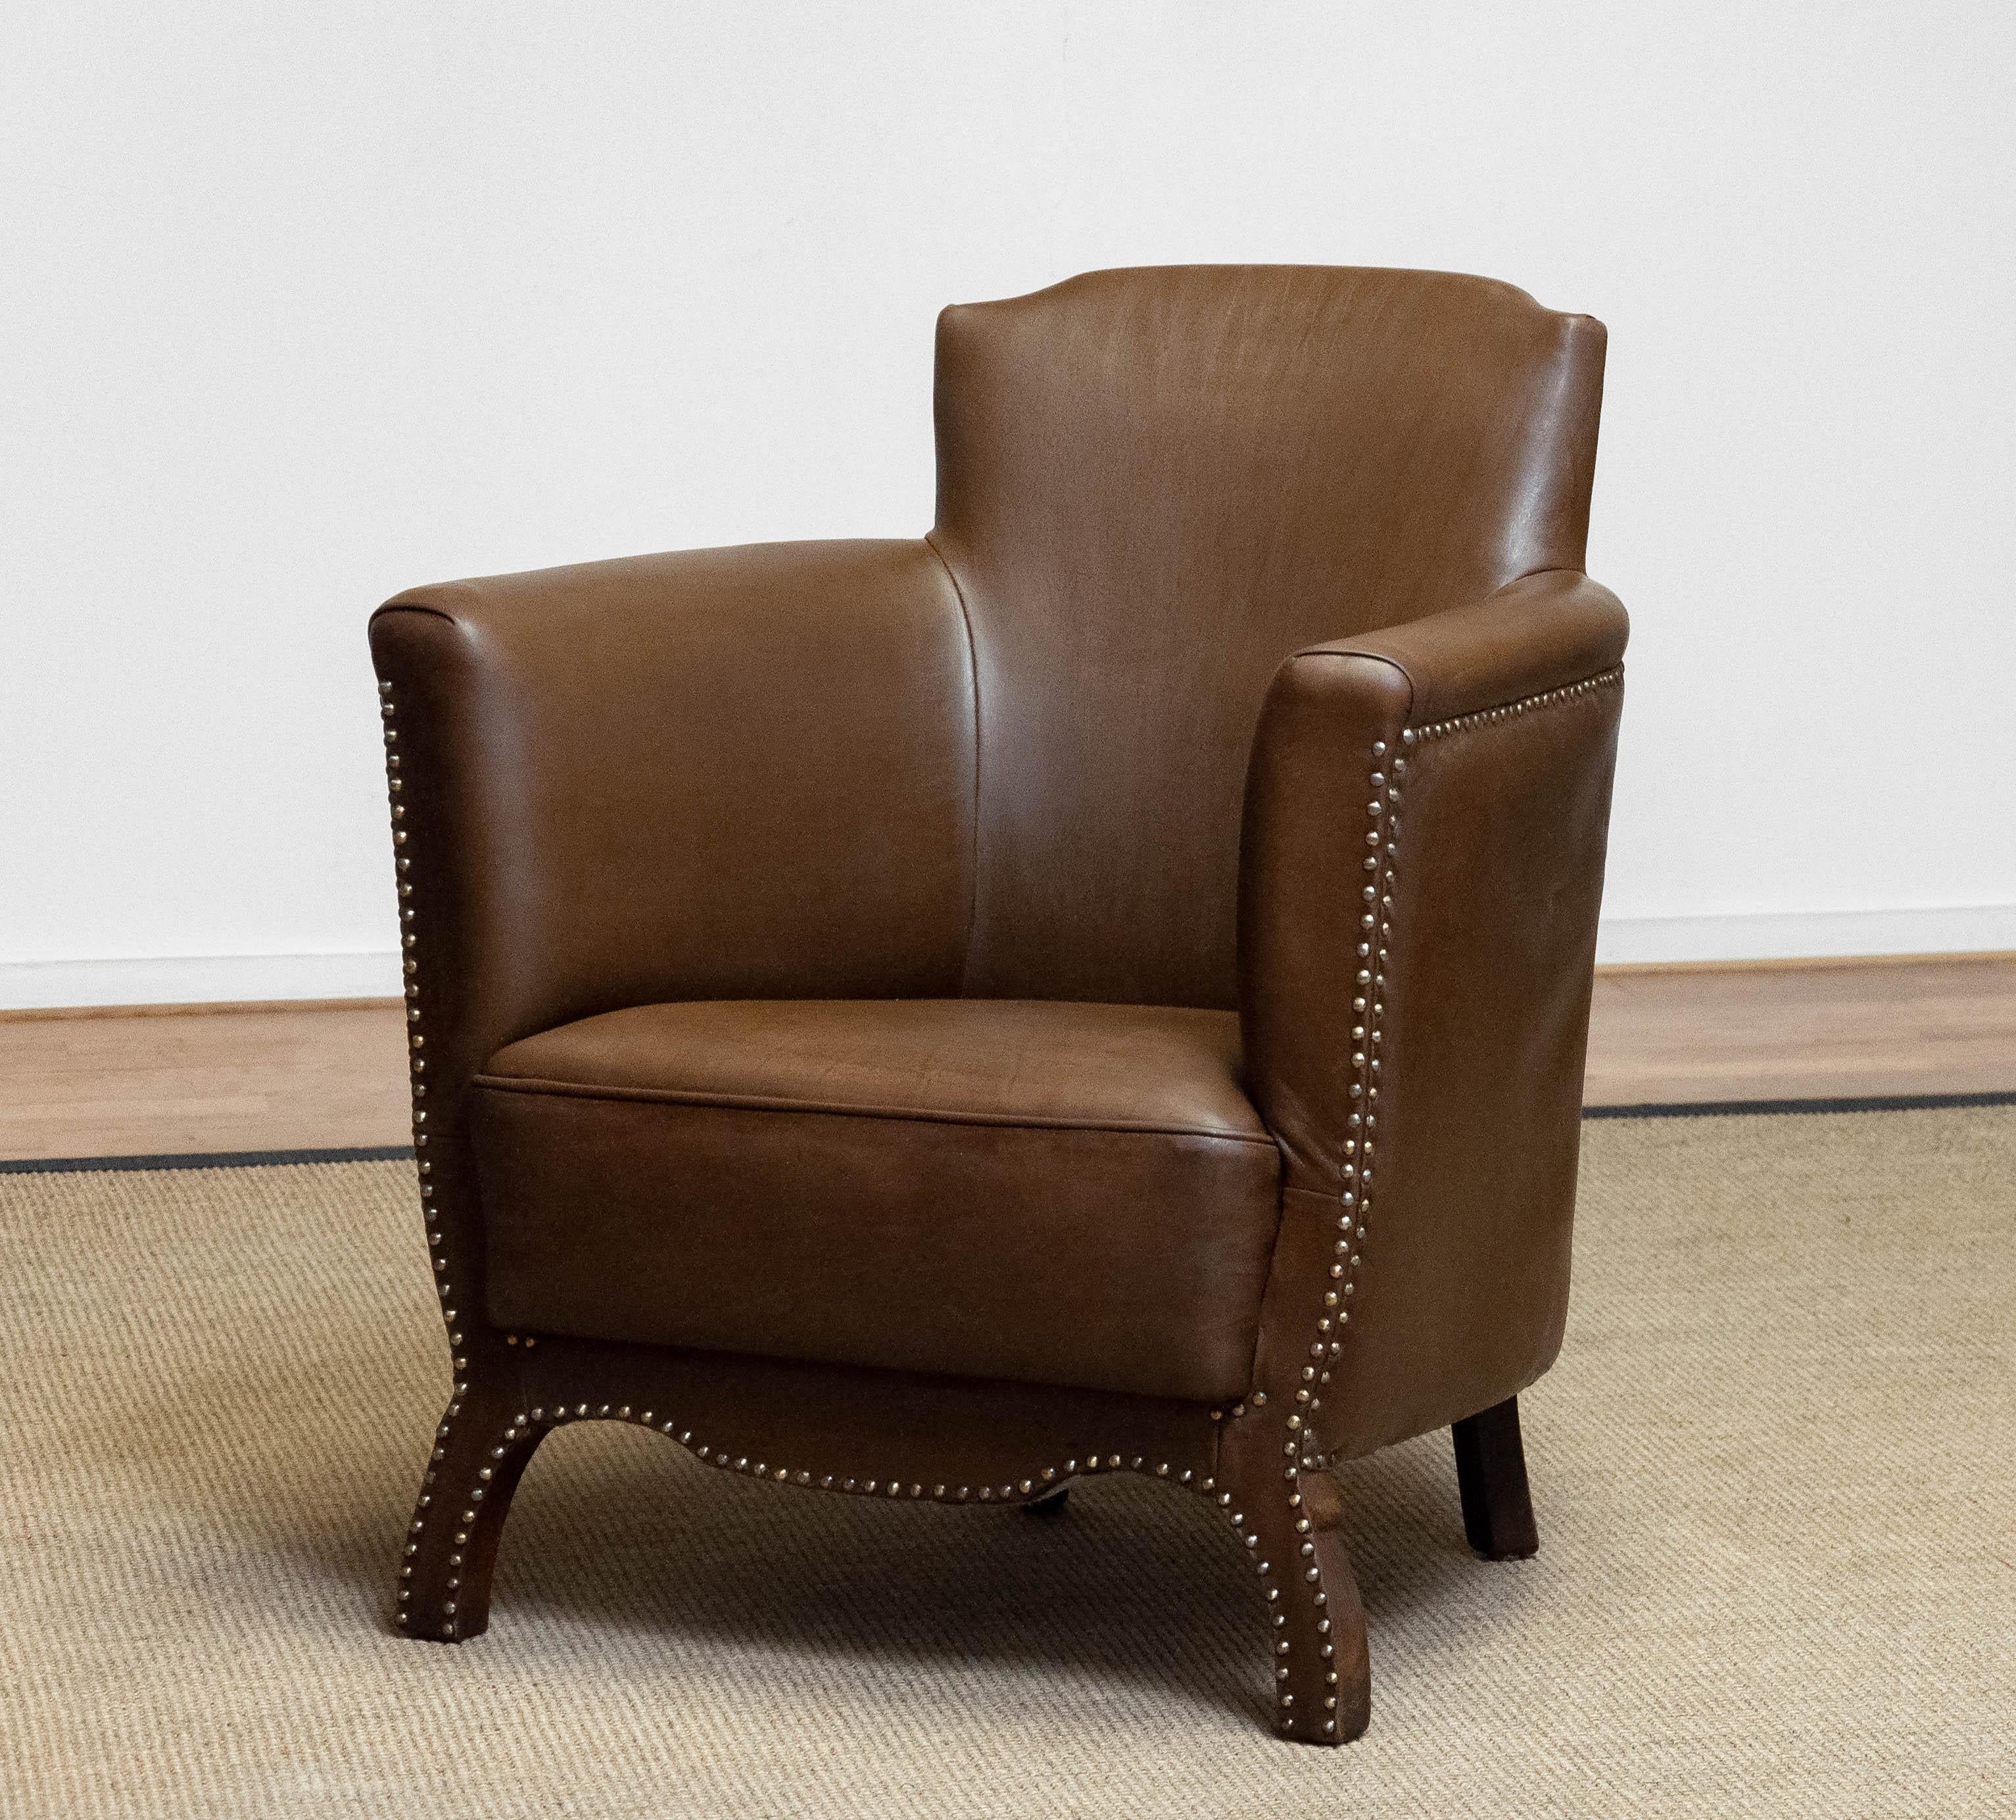 Beautiful brown / tan nailed leather lounge chair from the 1930s designed by Otto Schultz for Boet Götenburg Sweden. This lounge chair in in a later period ( in the 1990s ) fully restored and therefor in very good condition. Sits and supports great